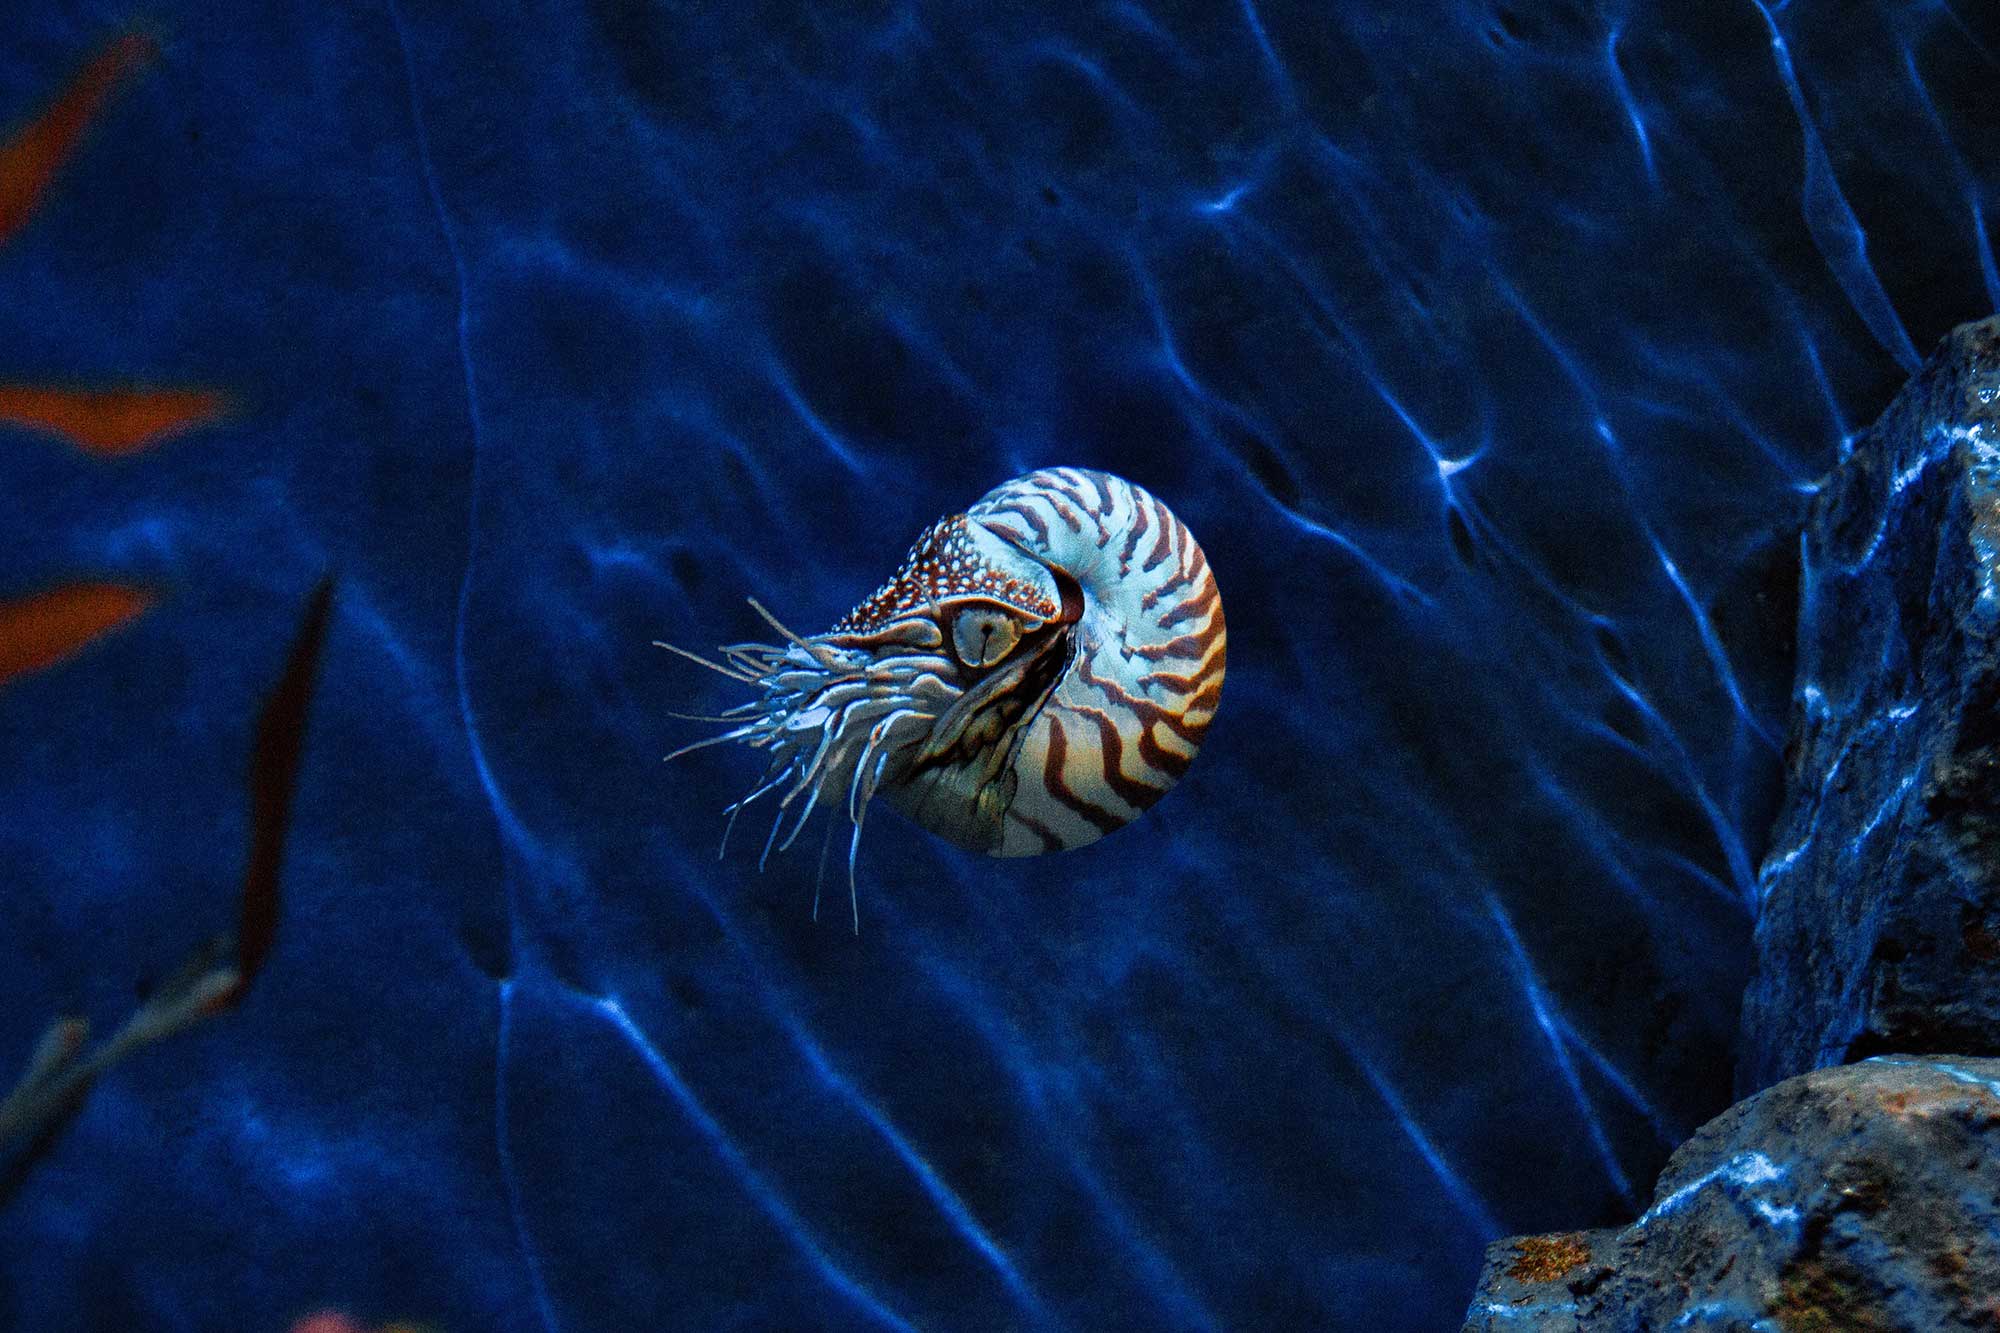 The nautilus shell isn't actually related to the golden ratio.